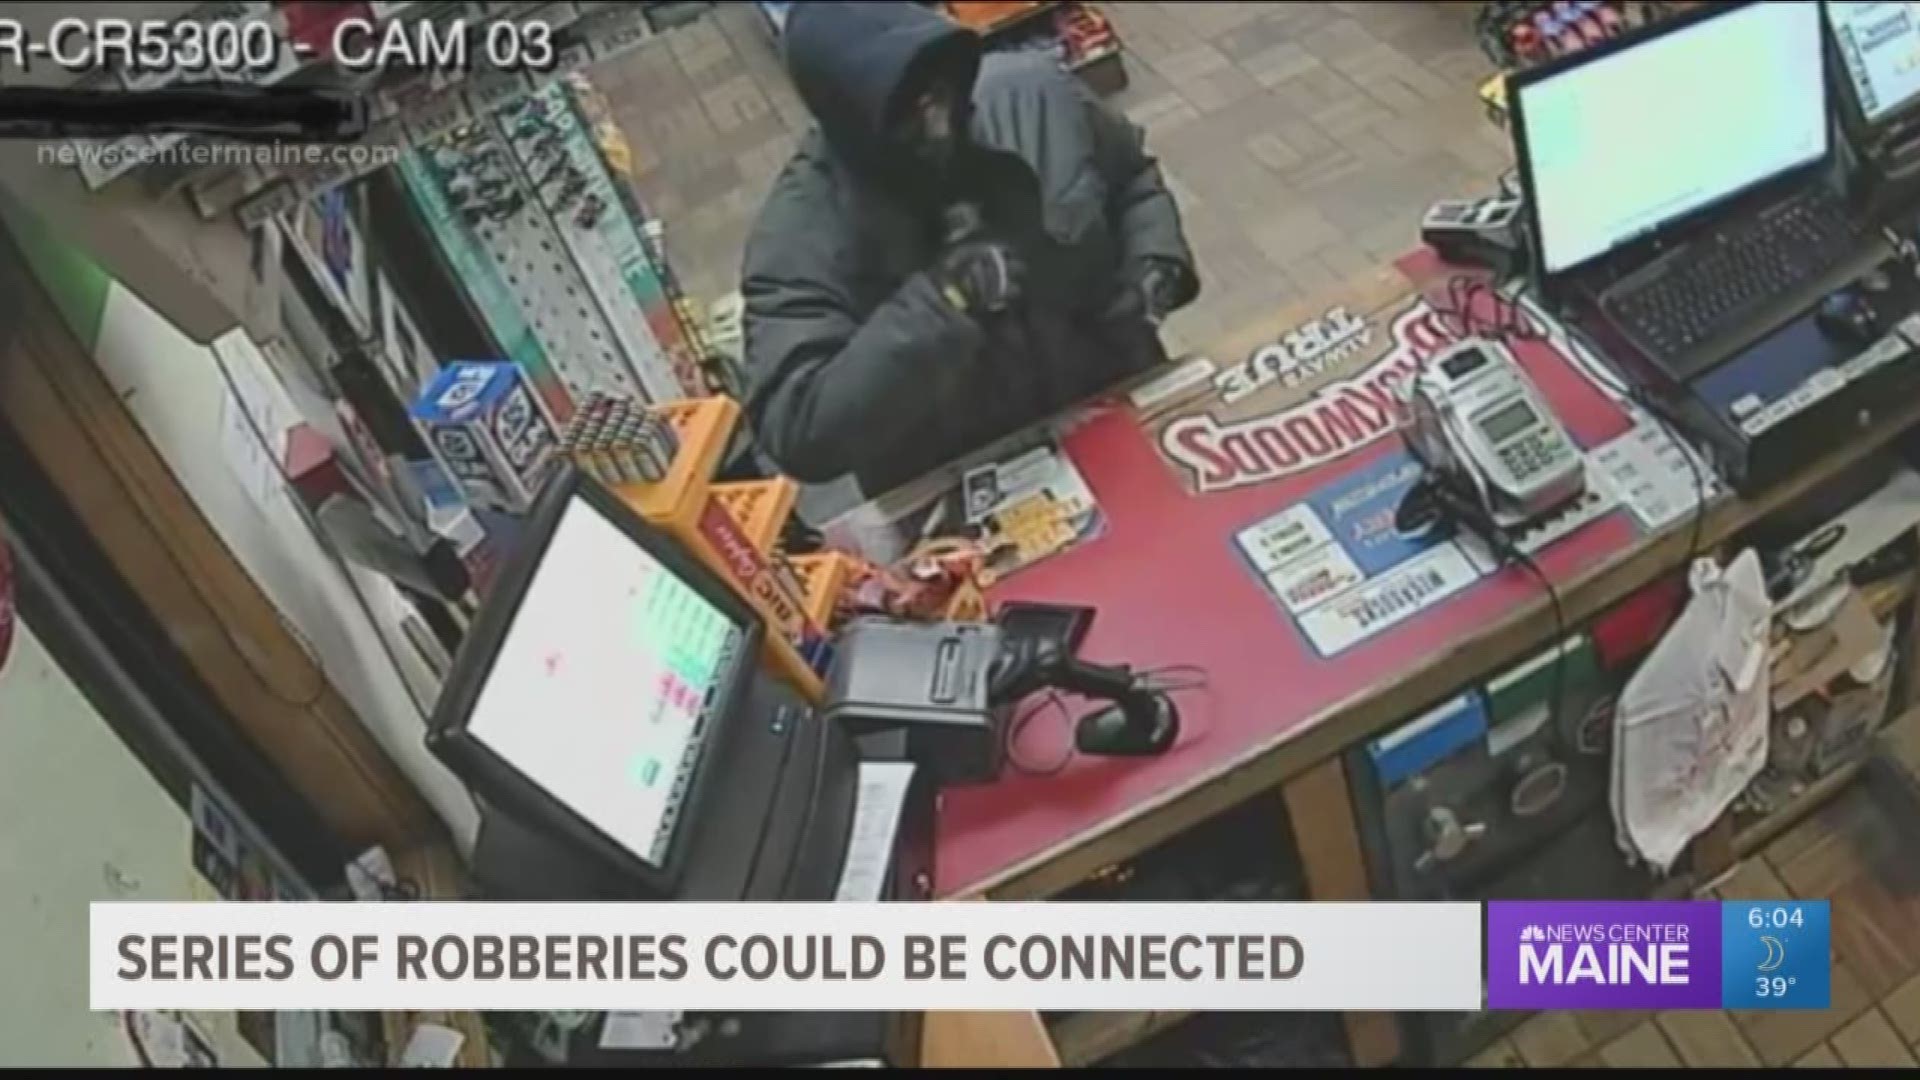 Series of robberies could be connected